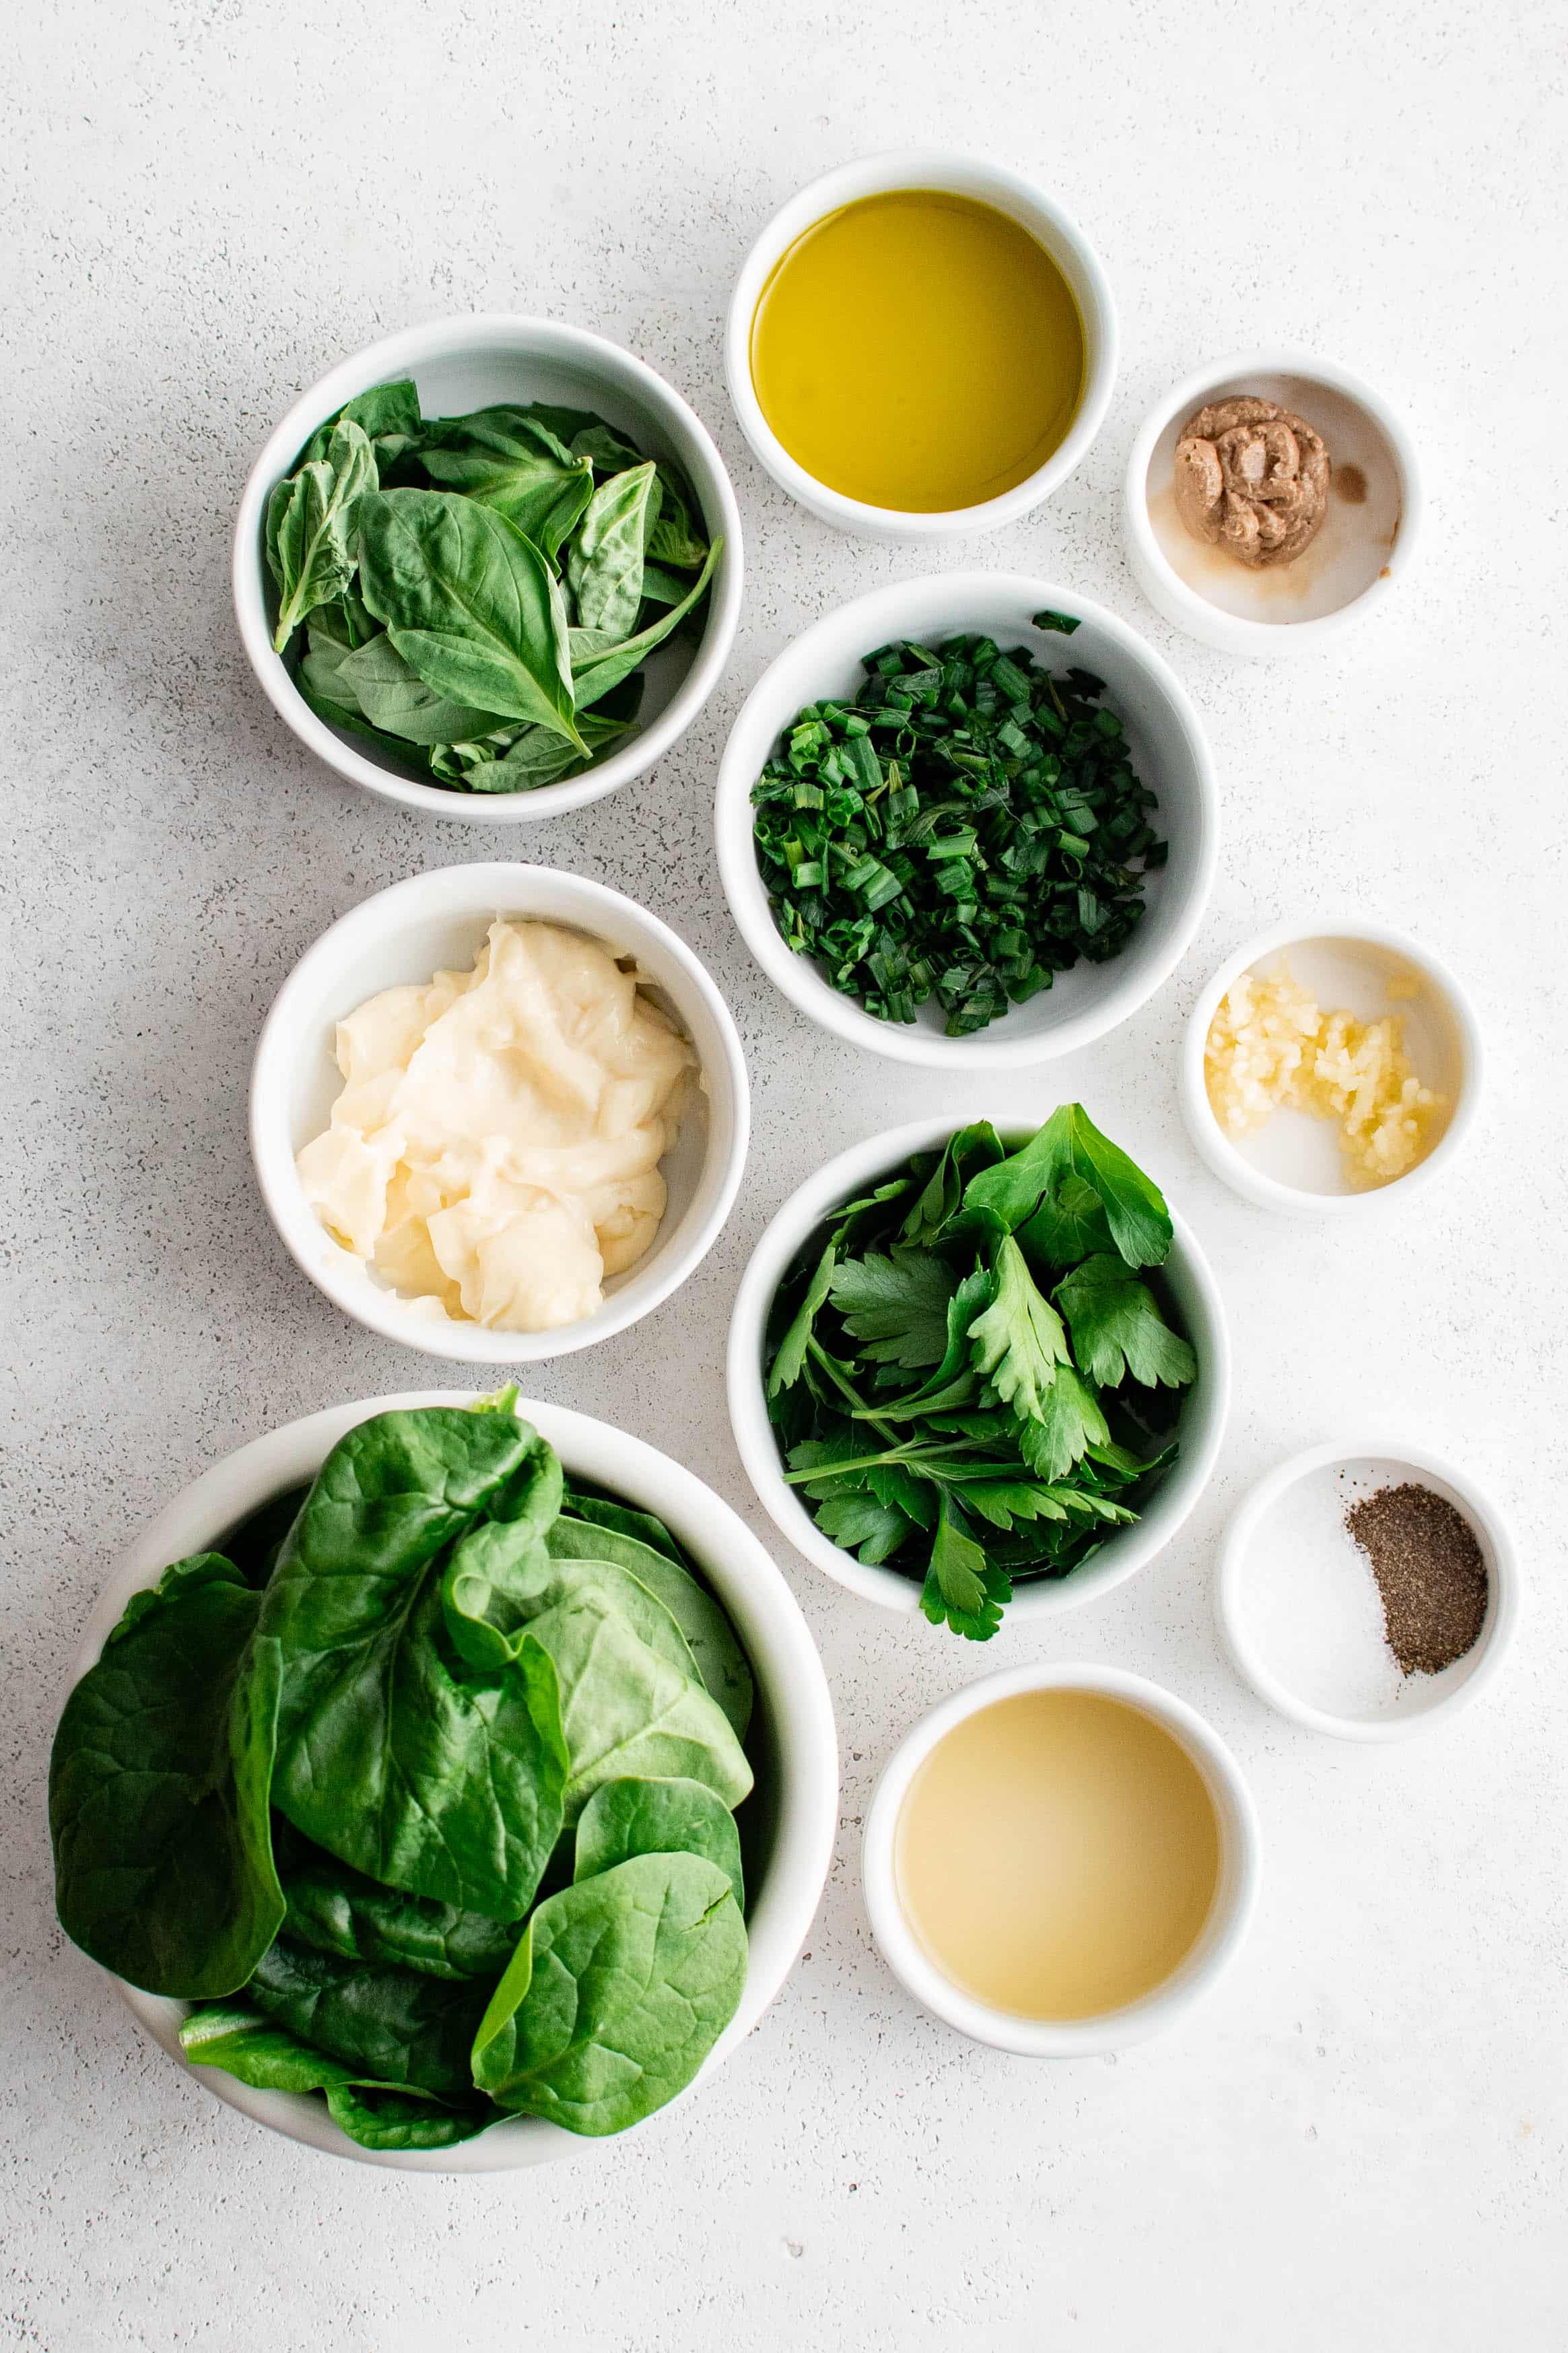 Ingredients needed to make green goddess dressing in individual measuring cups and ramekins.